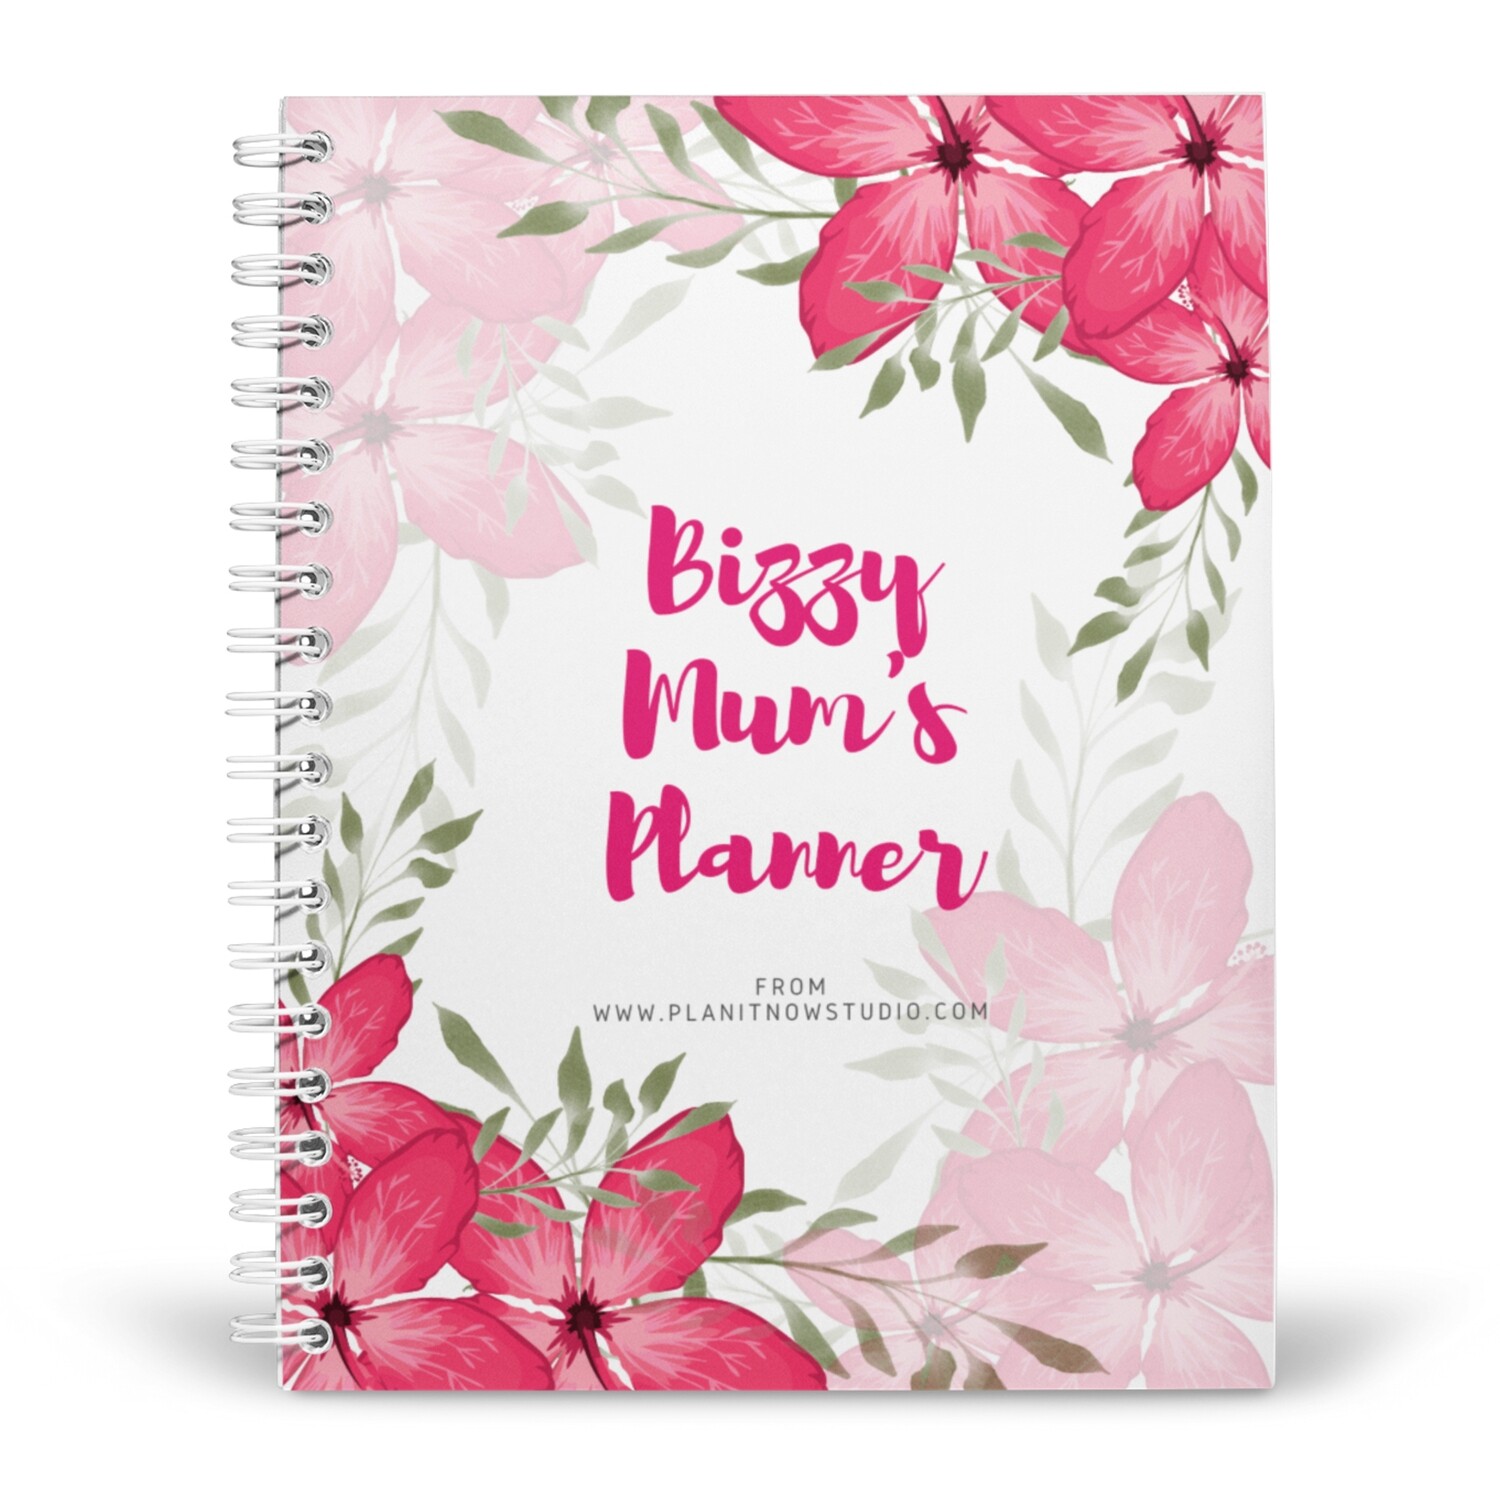 Bizzy Mums Planner - 26 Weeks of Planning for Busy Mum Family Life